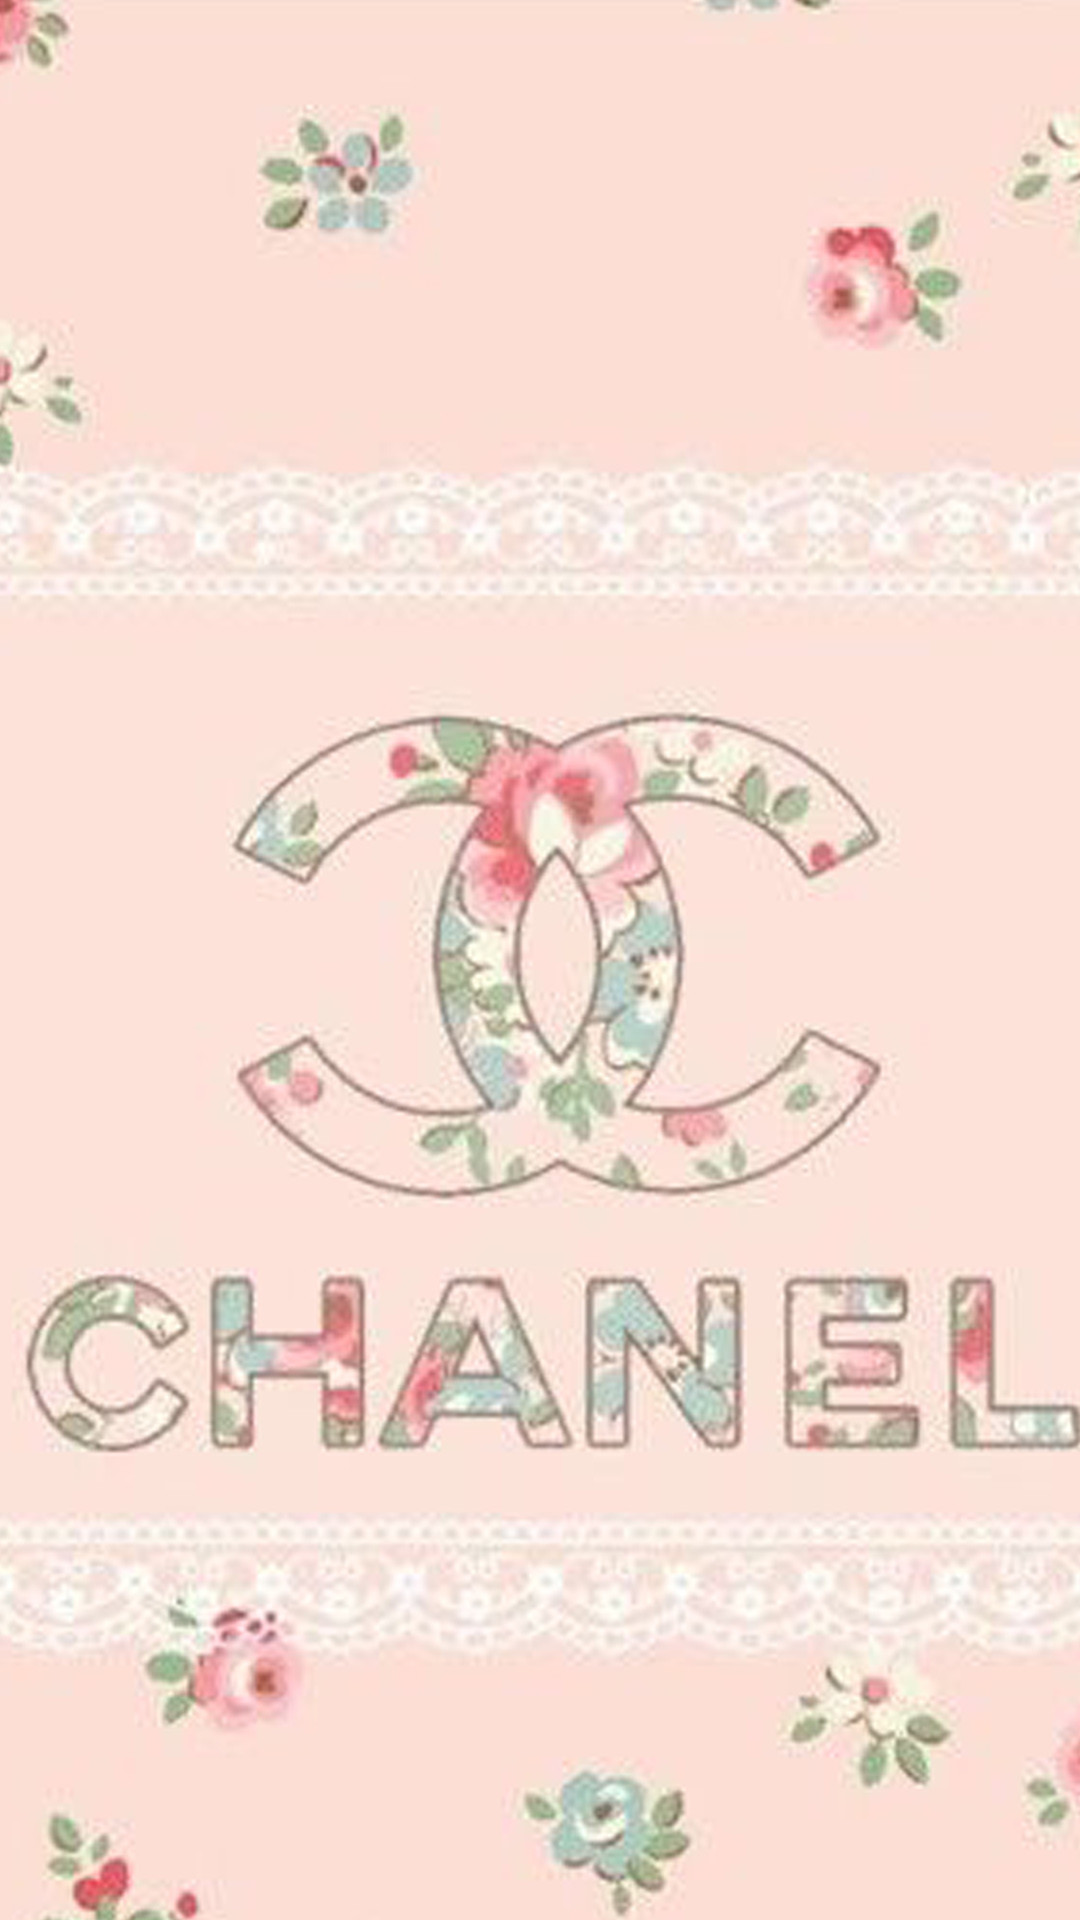 1080x1920 Hot Chanel iPhone Wallpaper HD Download Free.